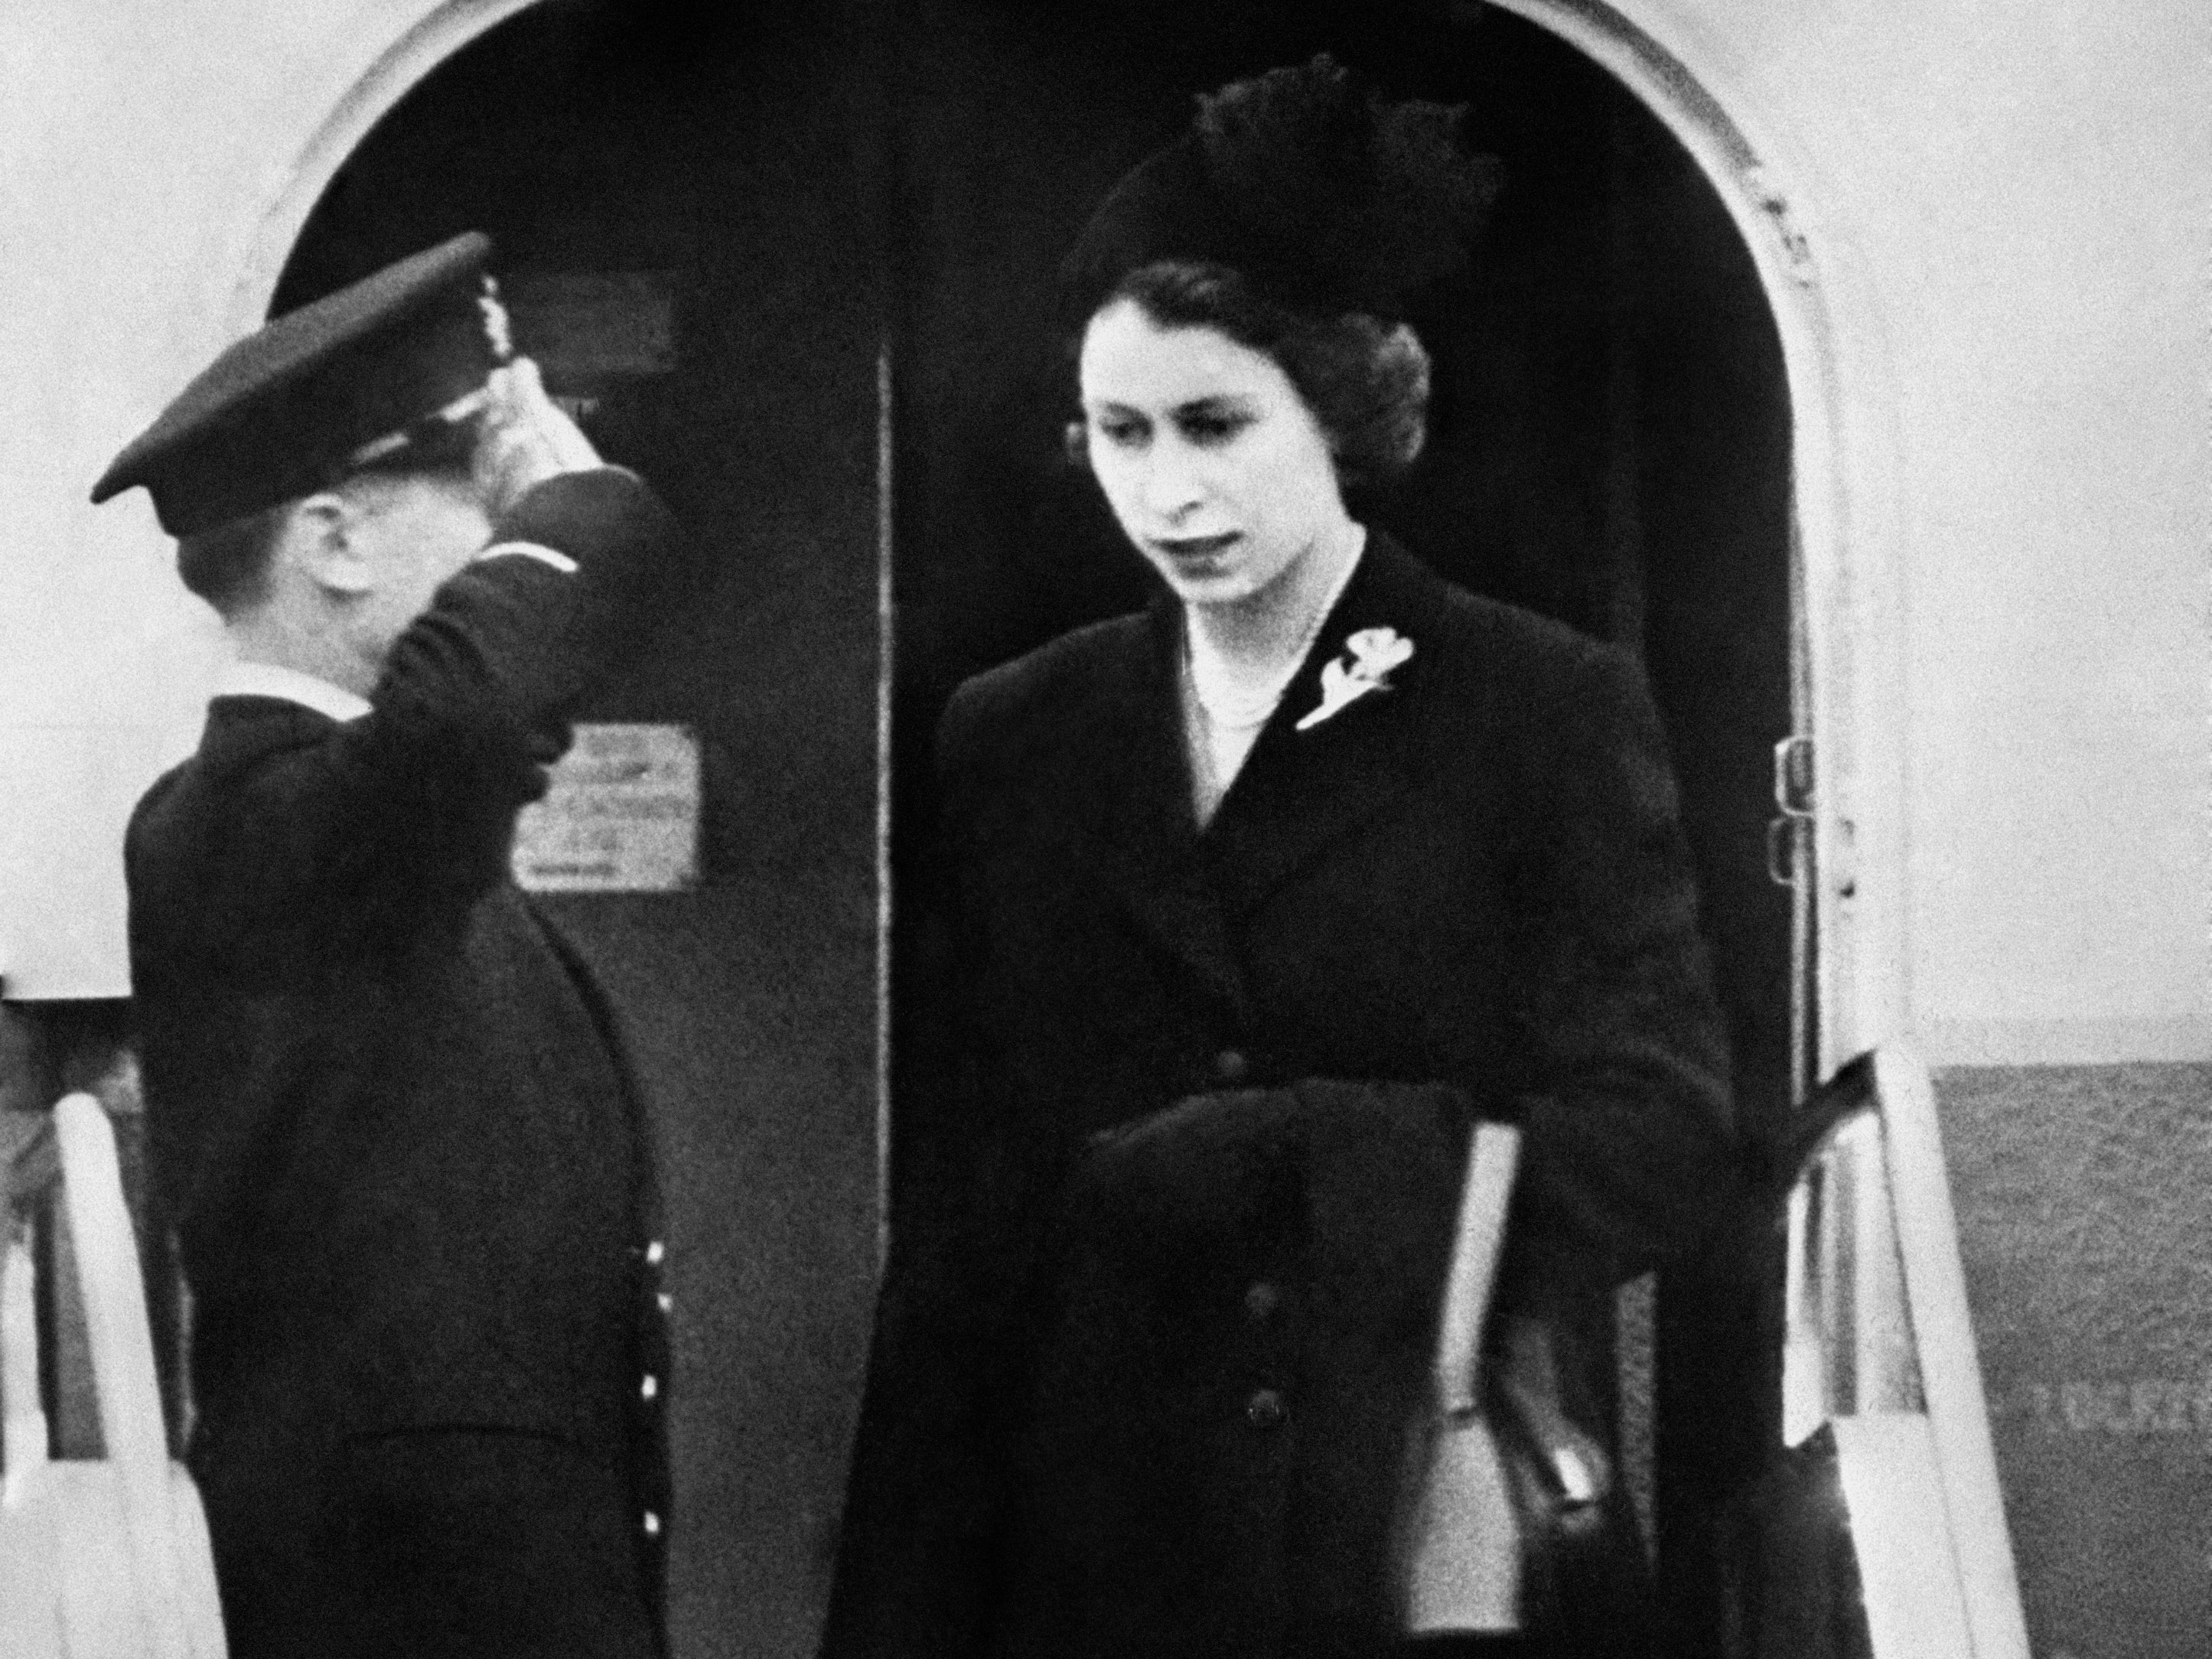 Princess Elizabeth arrives in Britain as the Queen after the passing of her father, 1952